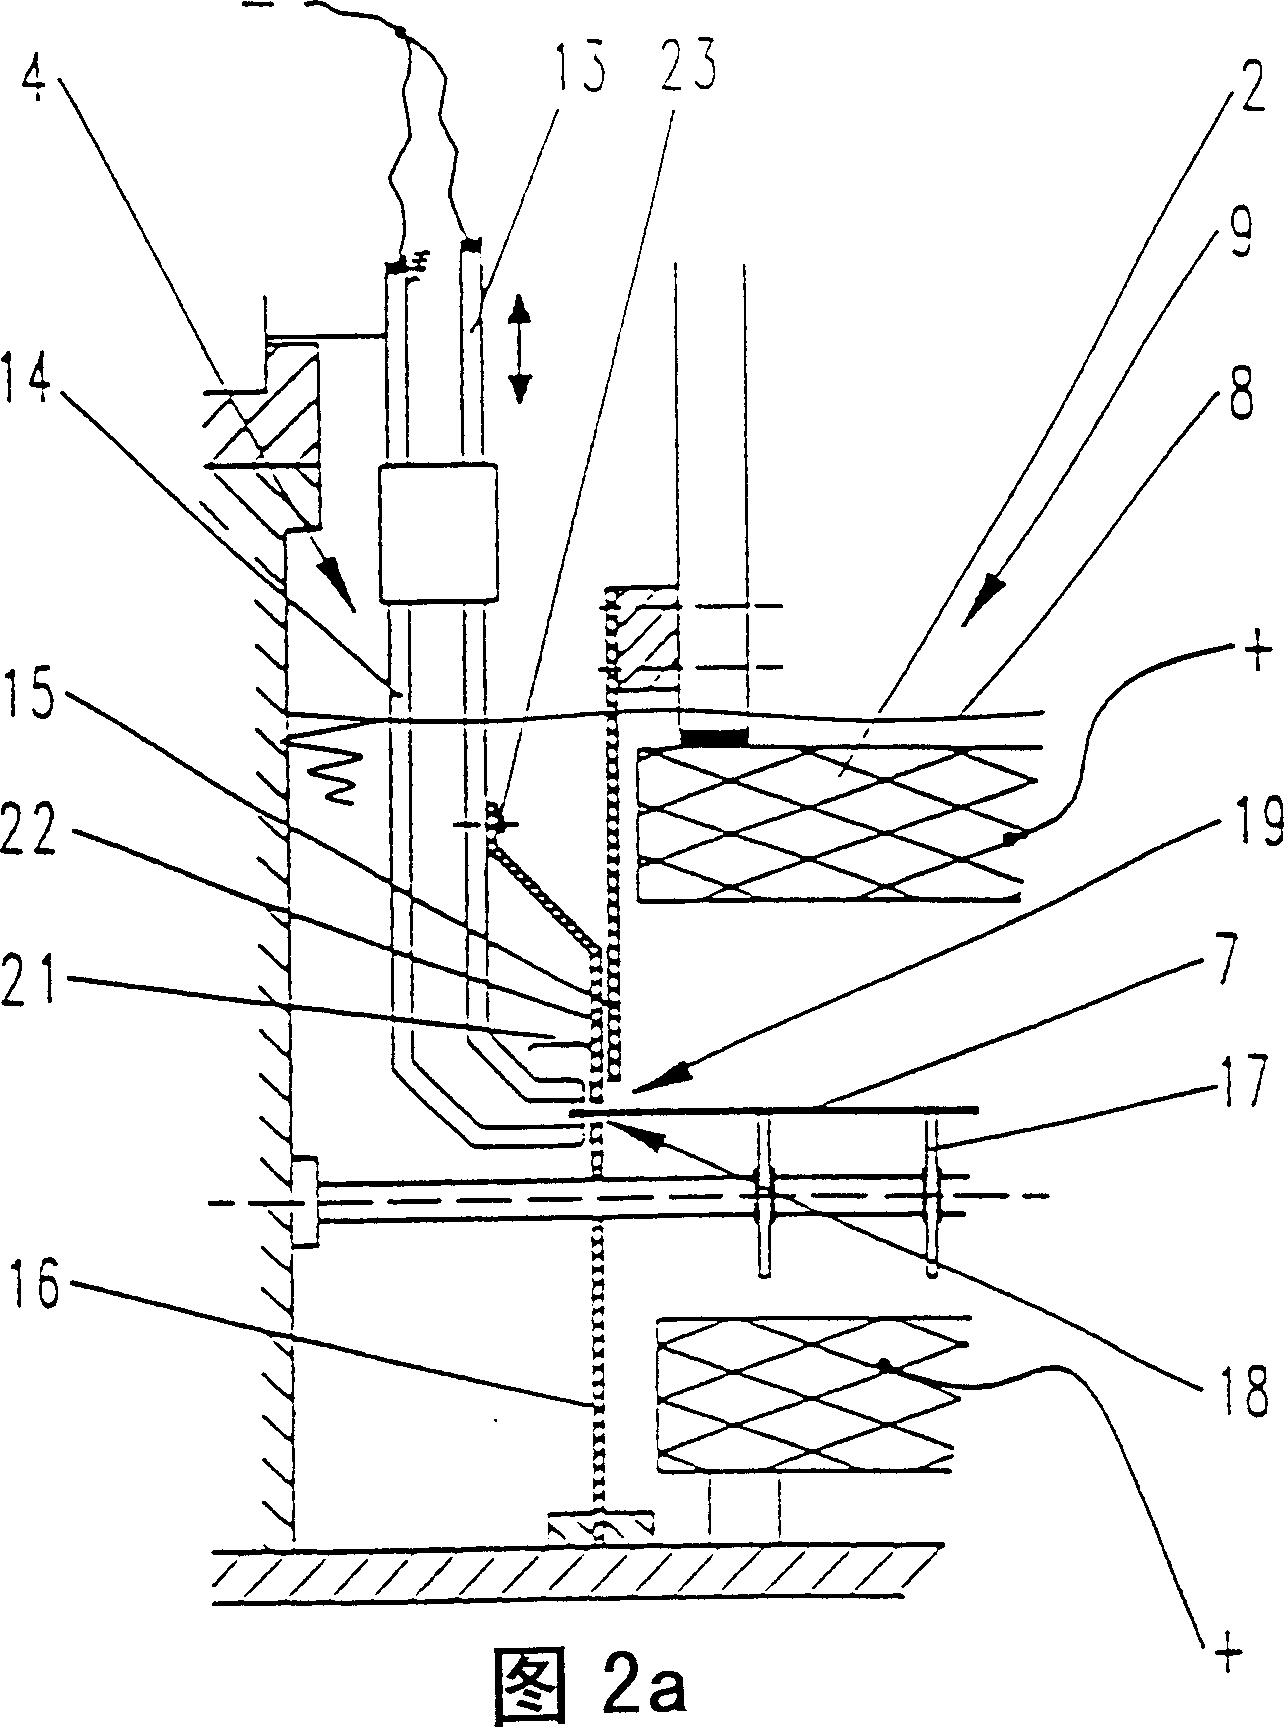 Device and method for evening out thickness of metal layers on electrical contact points on items that are to be treated